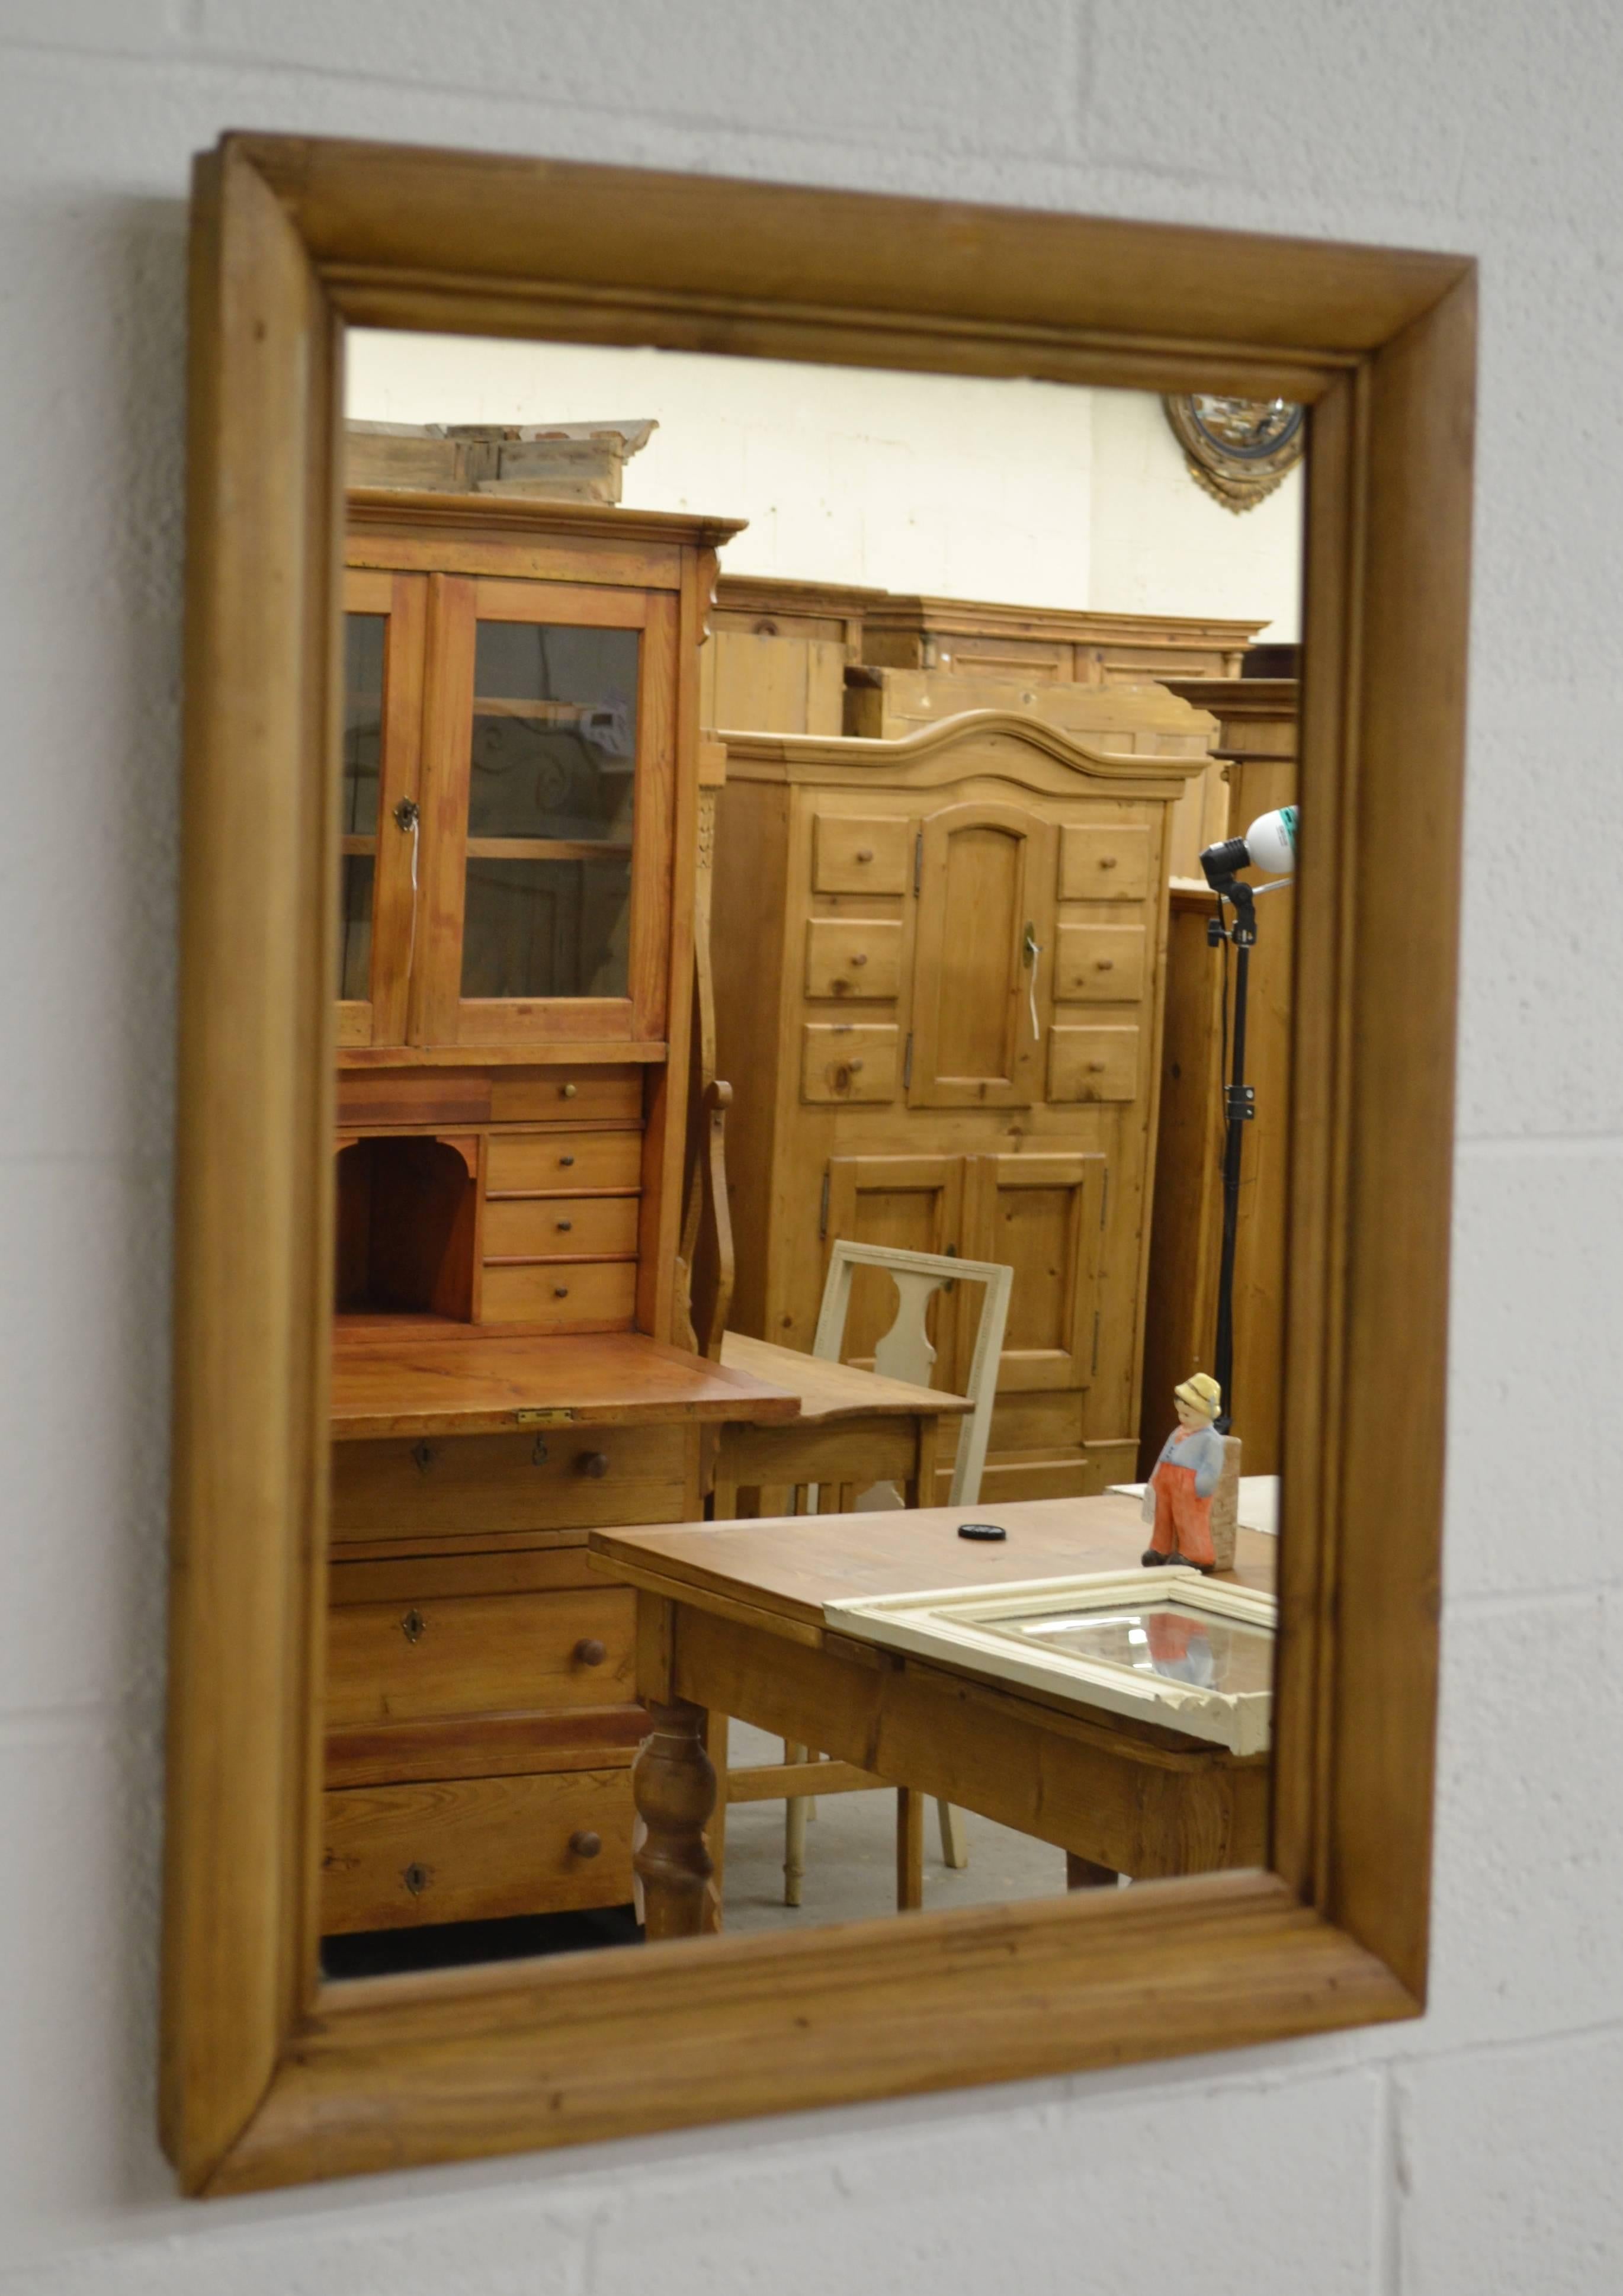 20VJL74j pine framed mirror. Measures: 23” W x 30” H.
 A handsome antique pine frame 2.5” thick and 2” deep, fitted with new mirror glass. $350
 